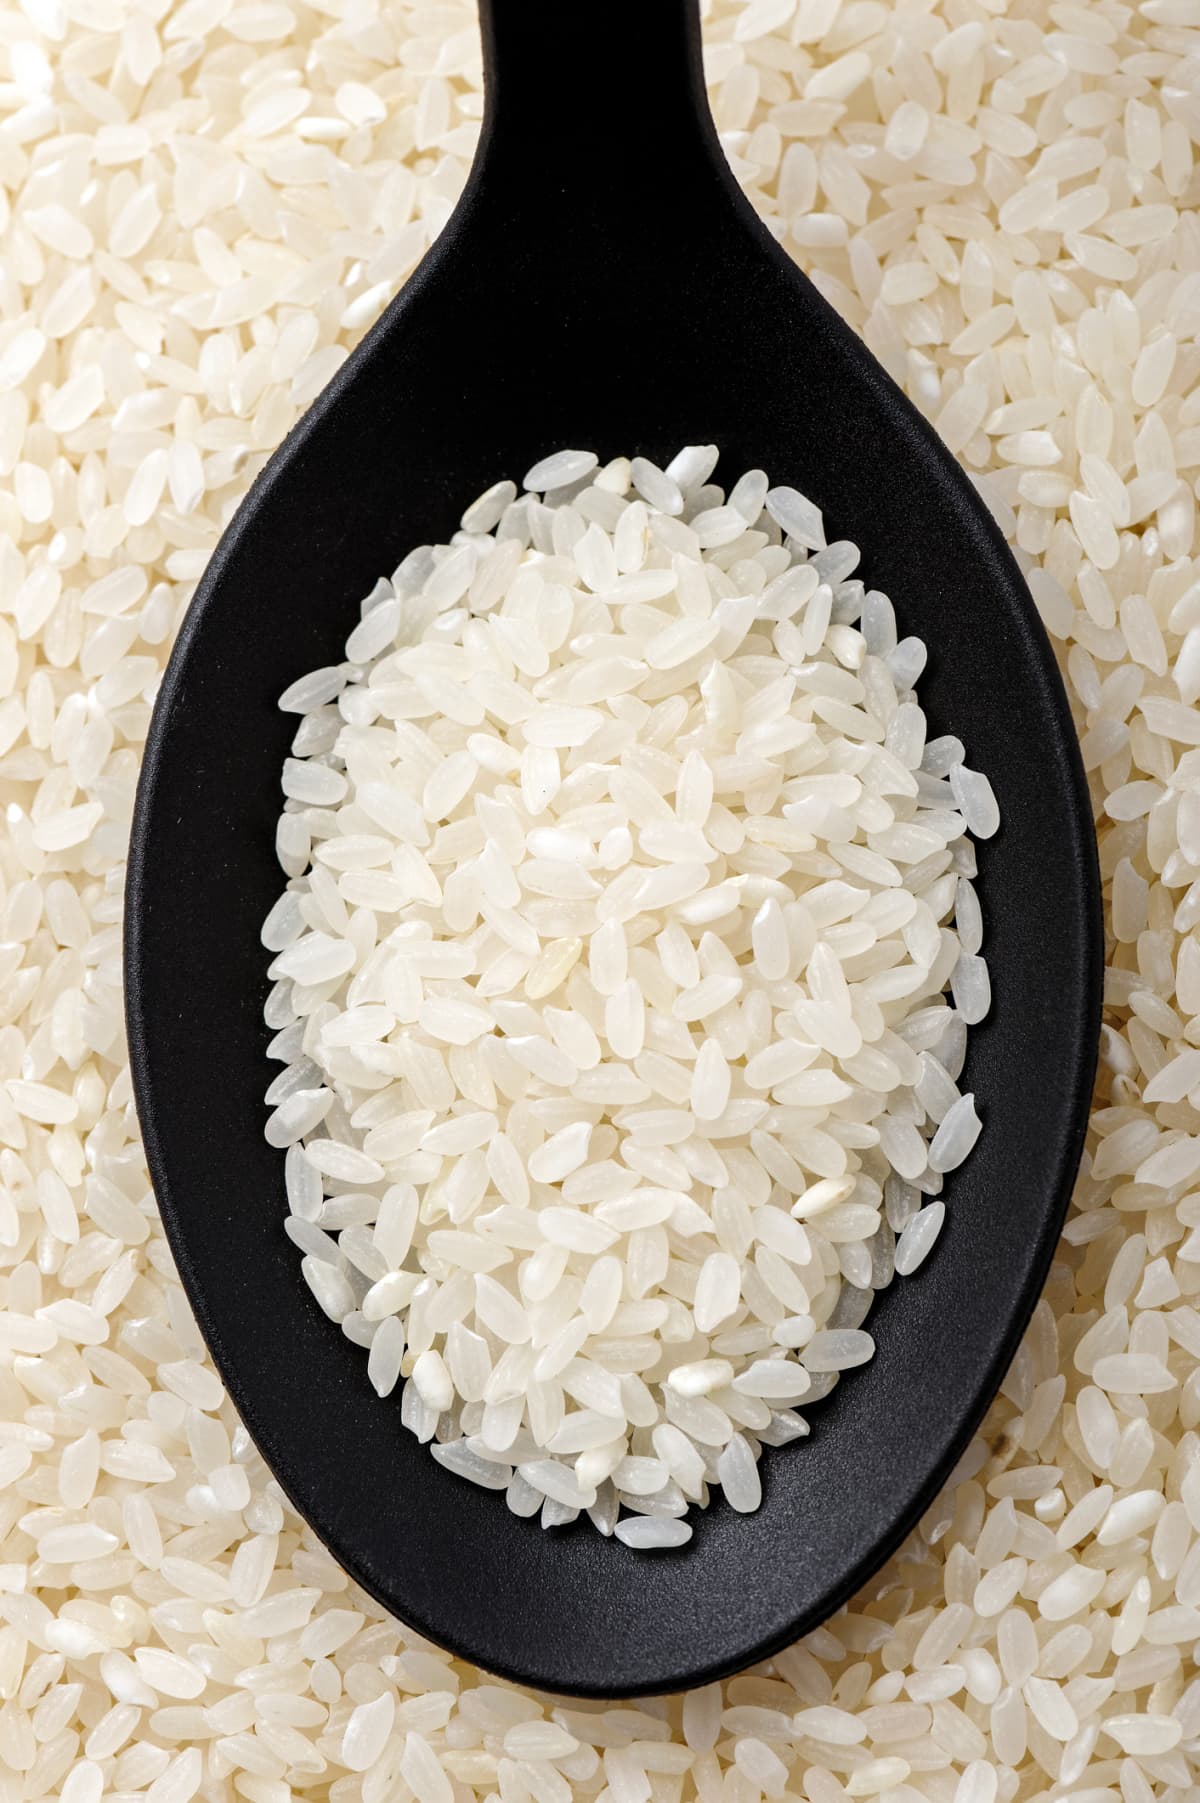 Top view of black spoon full of calrose rice.